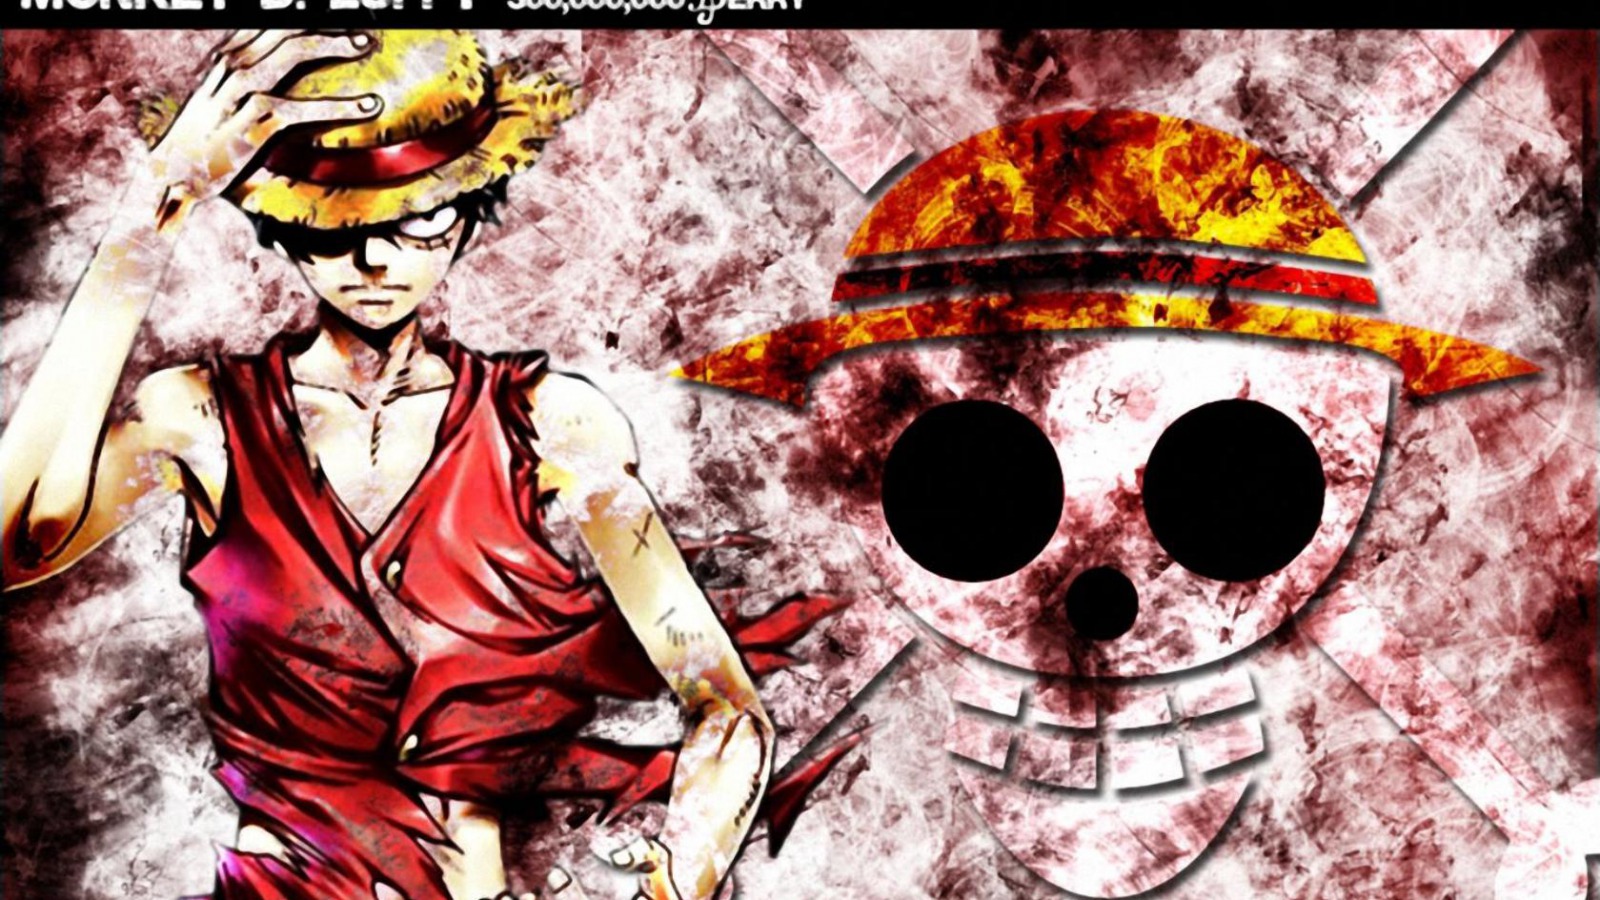 30 Cool One Piece Wallpapers HD   MixHD wallpapers